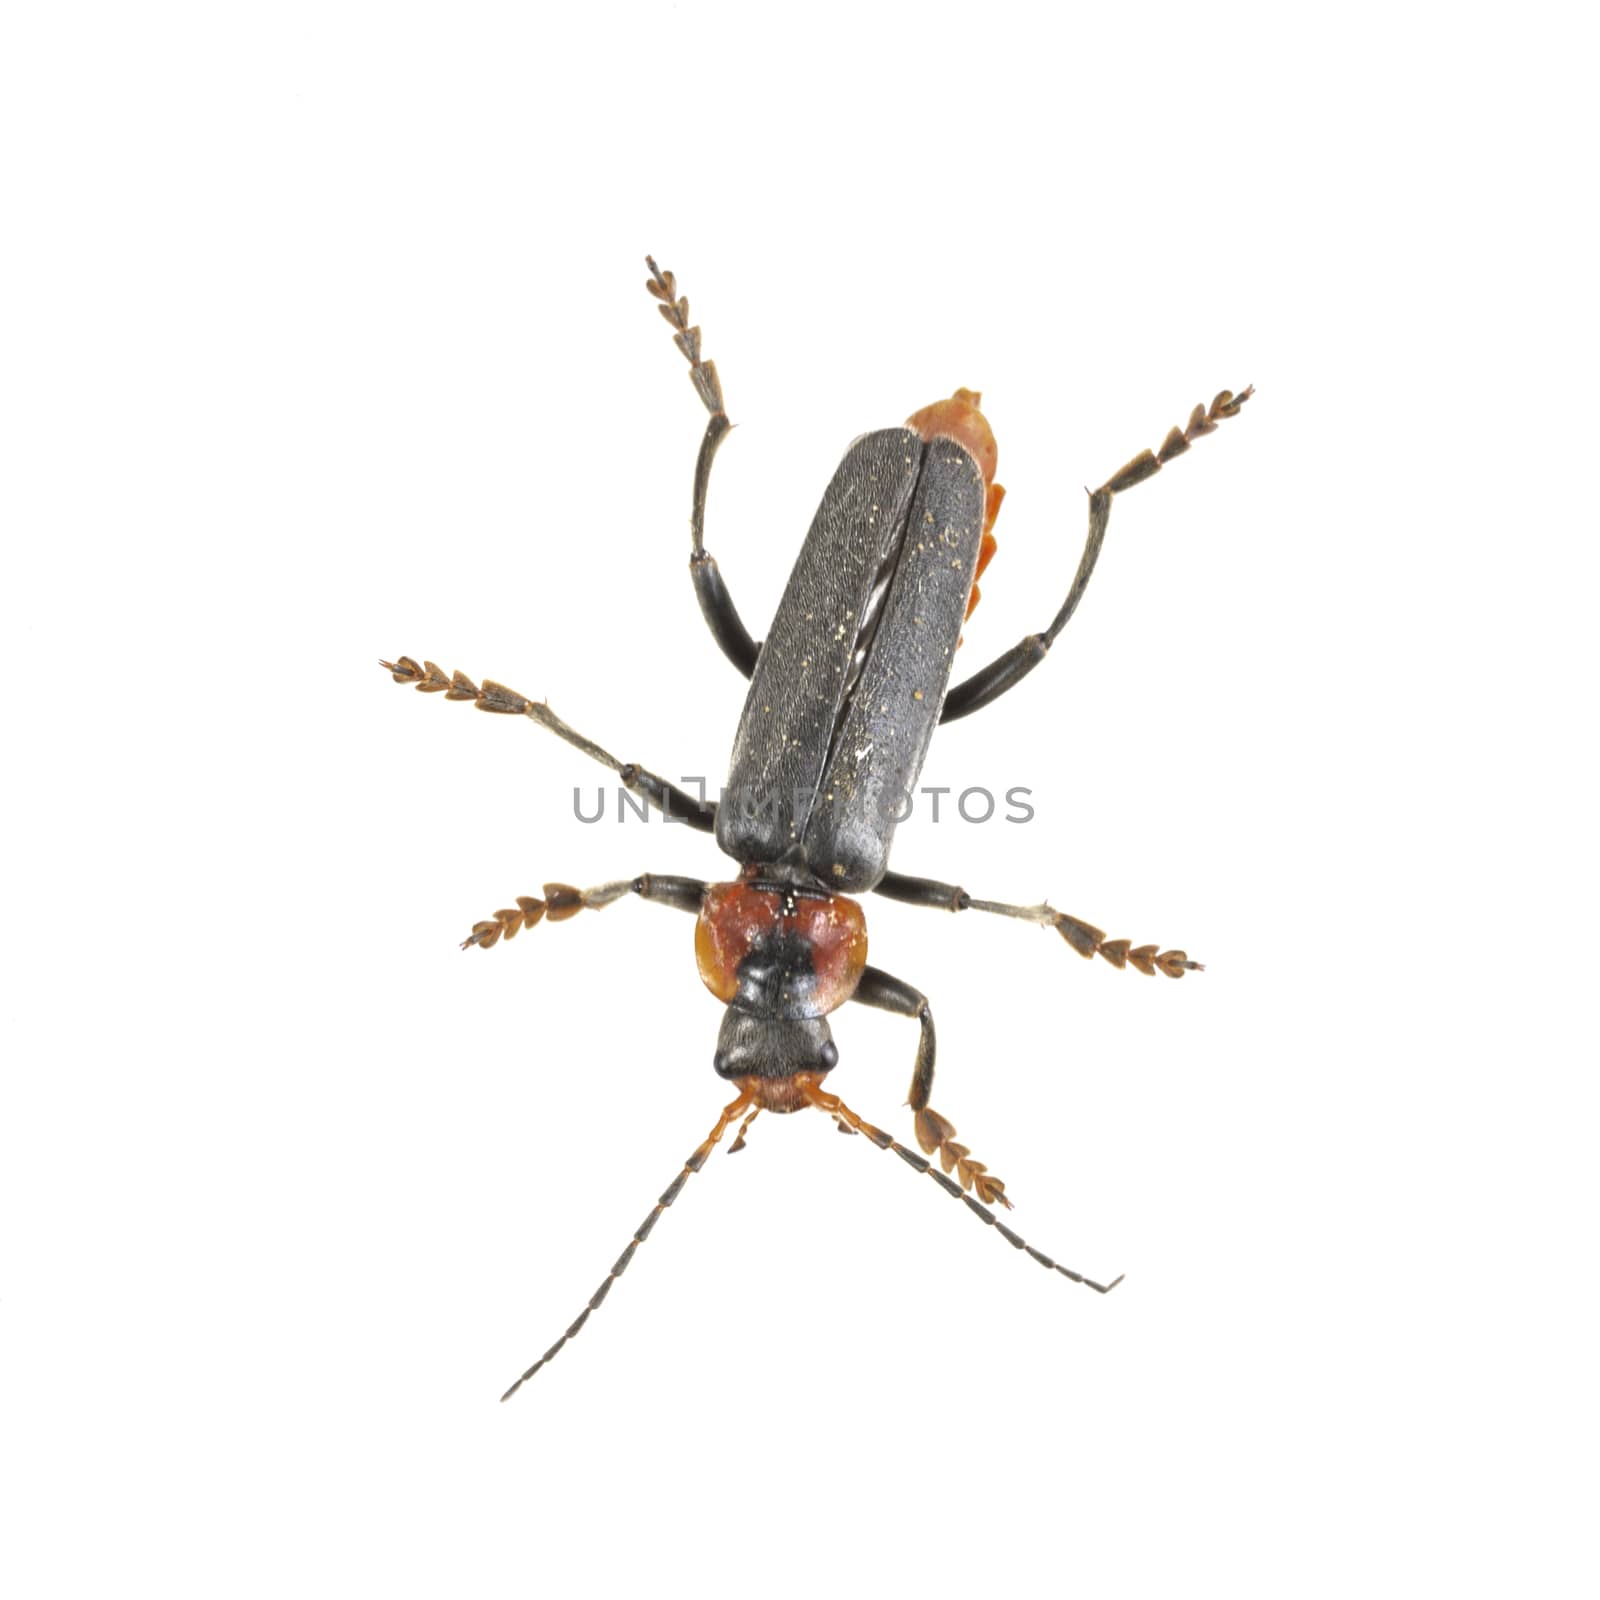 Soldier beetle on a white background by neryx